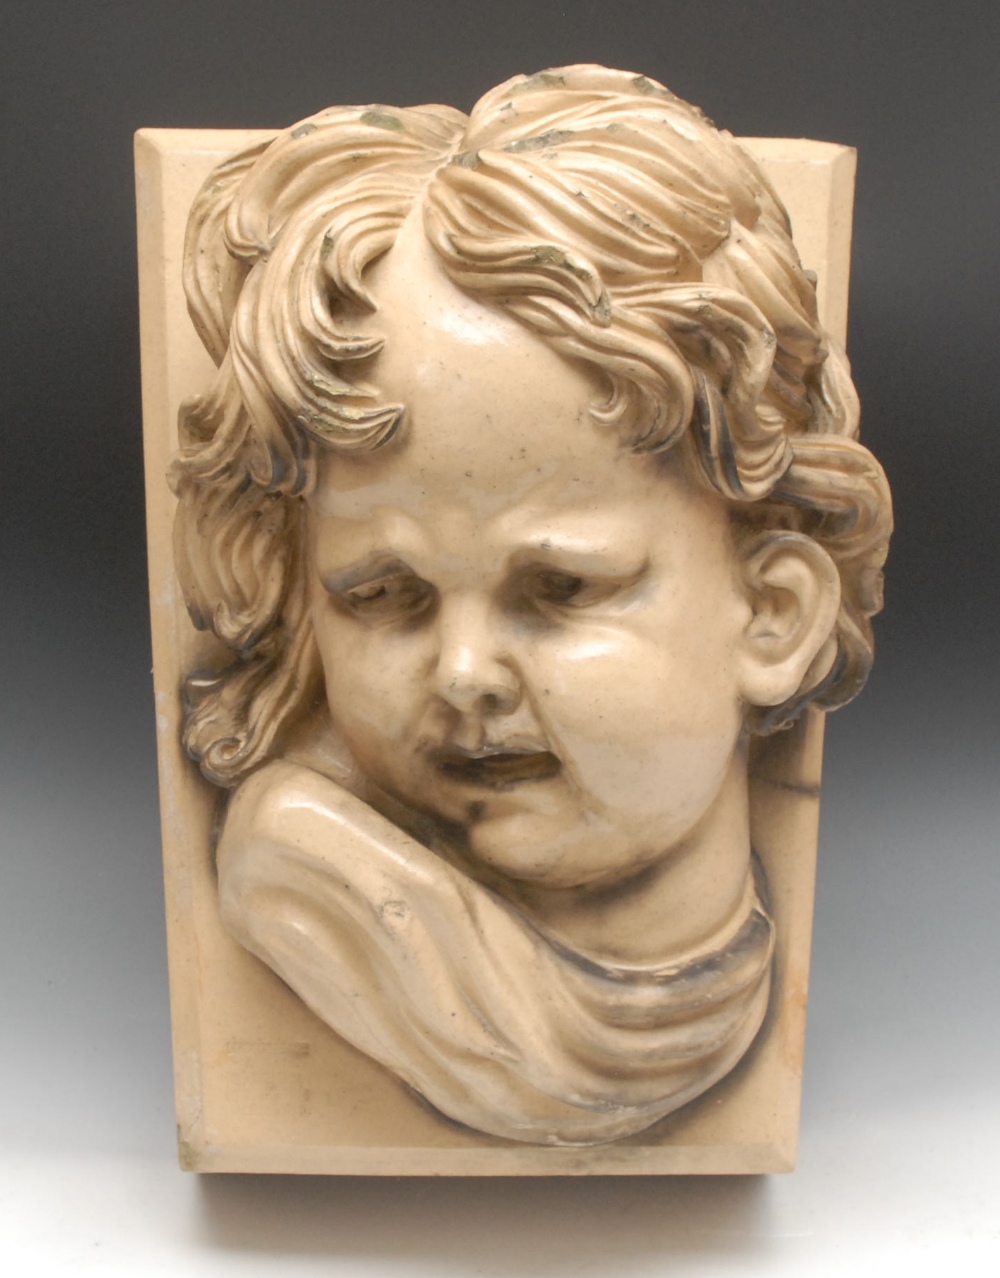 A Frederick Lipscombe & Co Chesterfield patent glazed terracotta architectural corbel, modelled with